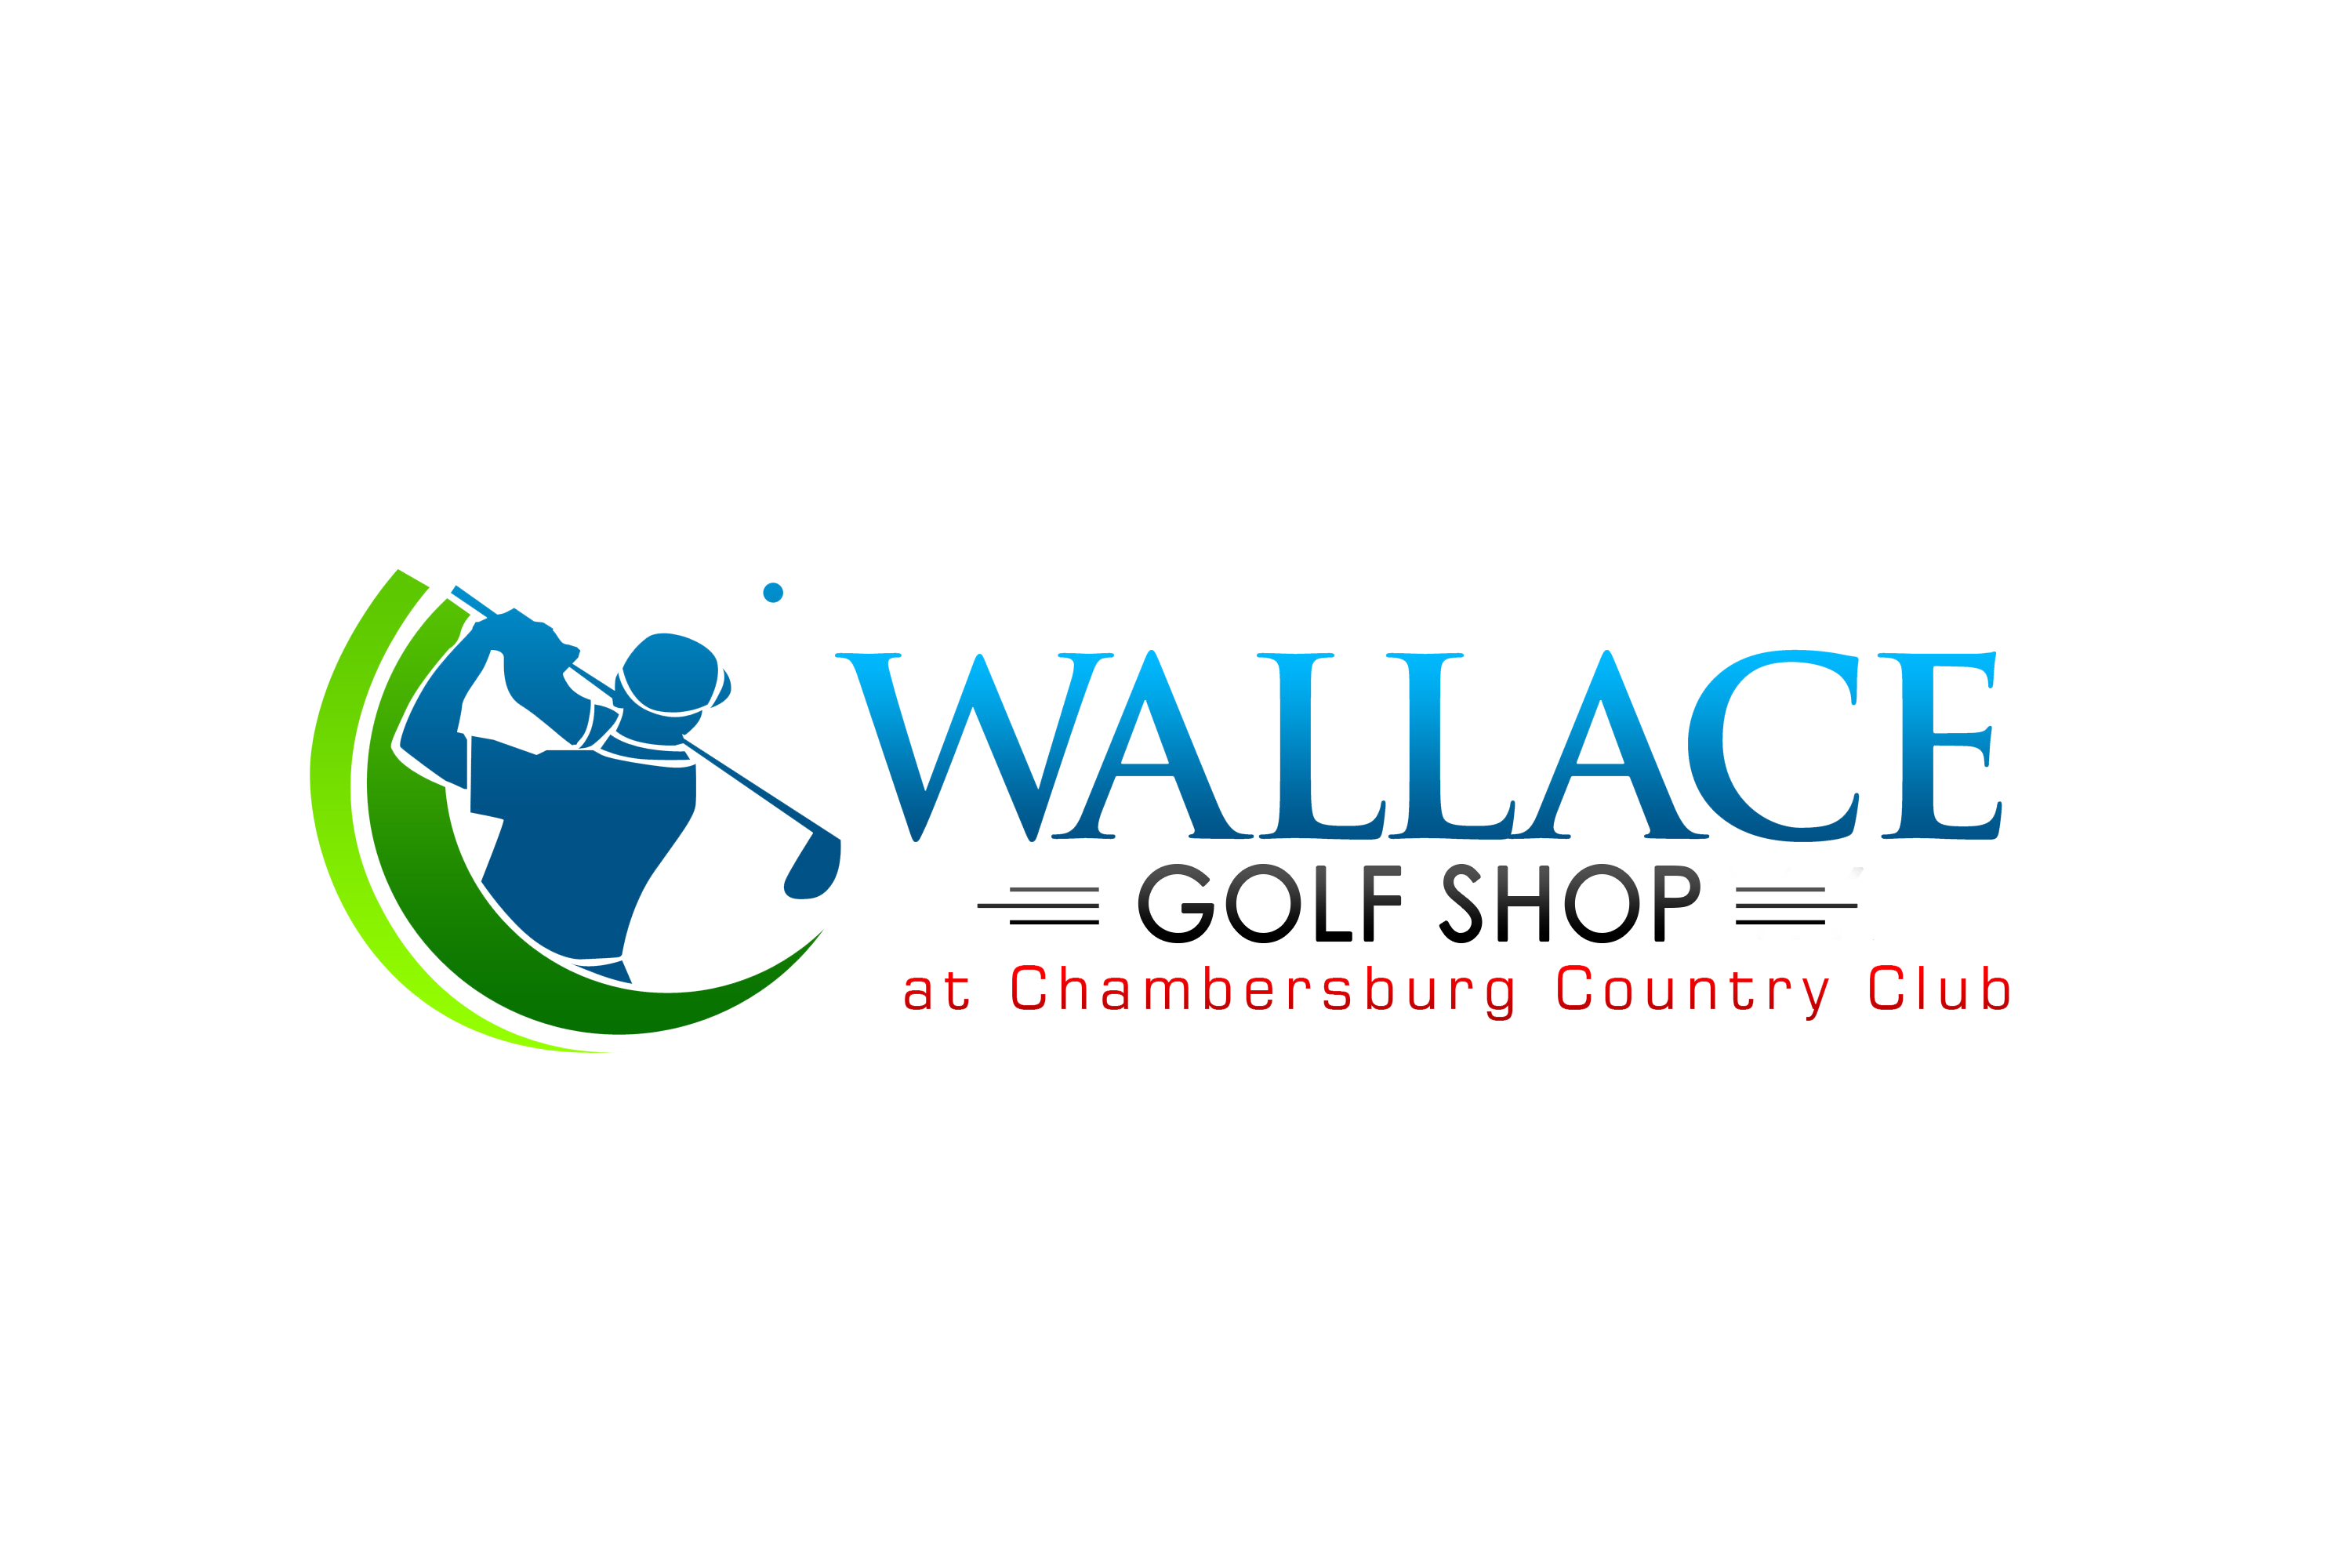 Wallace Golf Shop at Chambersburg Country Club